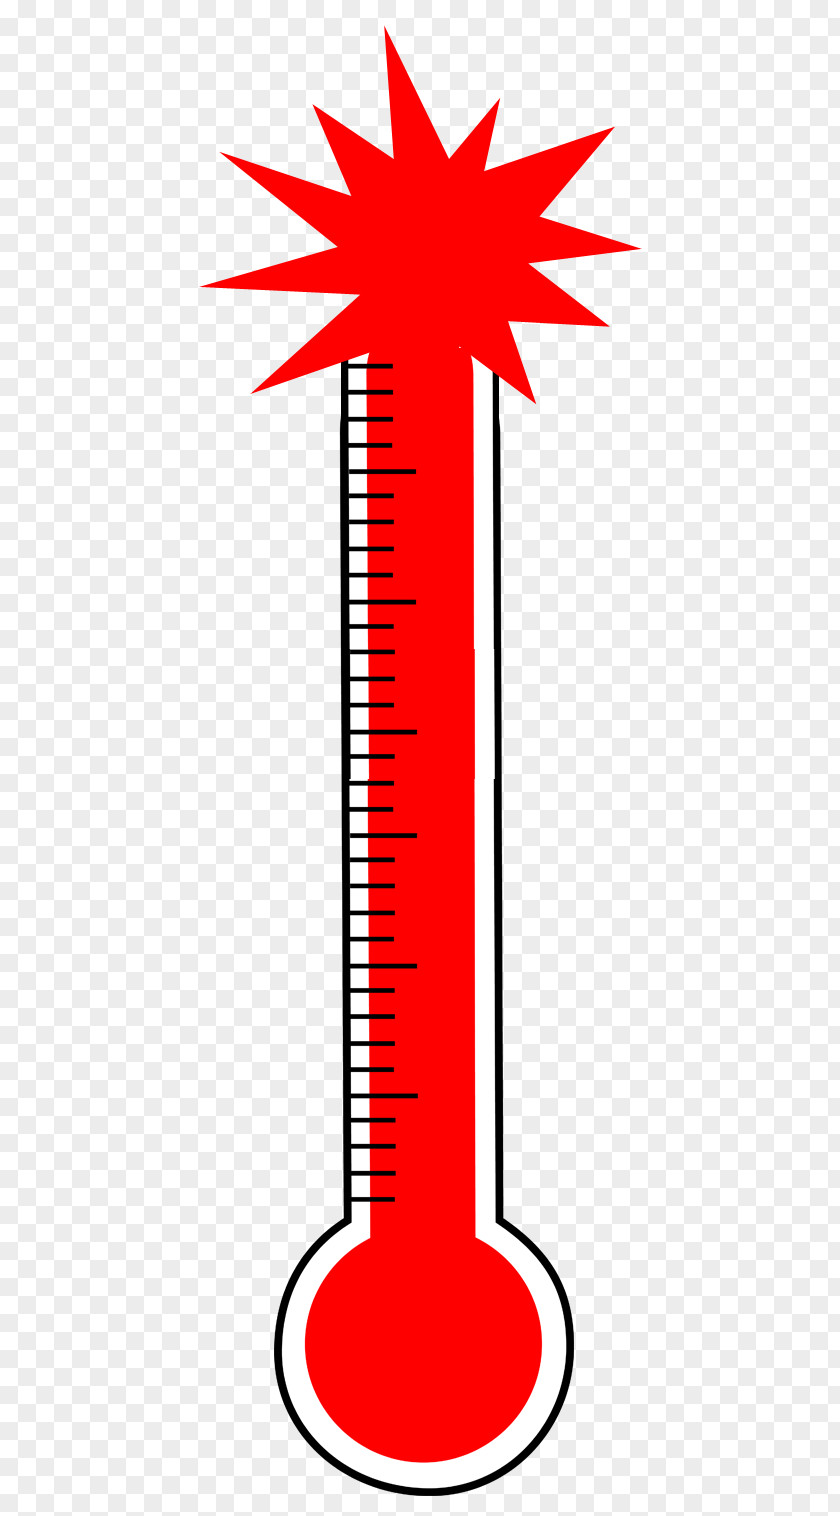 Heat Wave Clipart Clip Art Thermometer Openclipart Image Illustration PNG